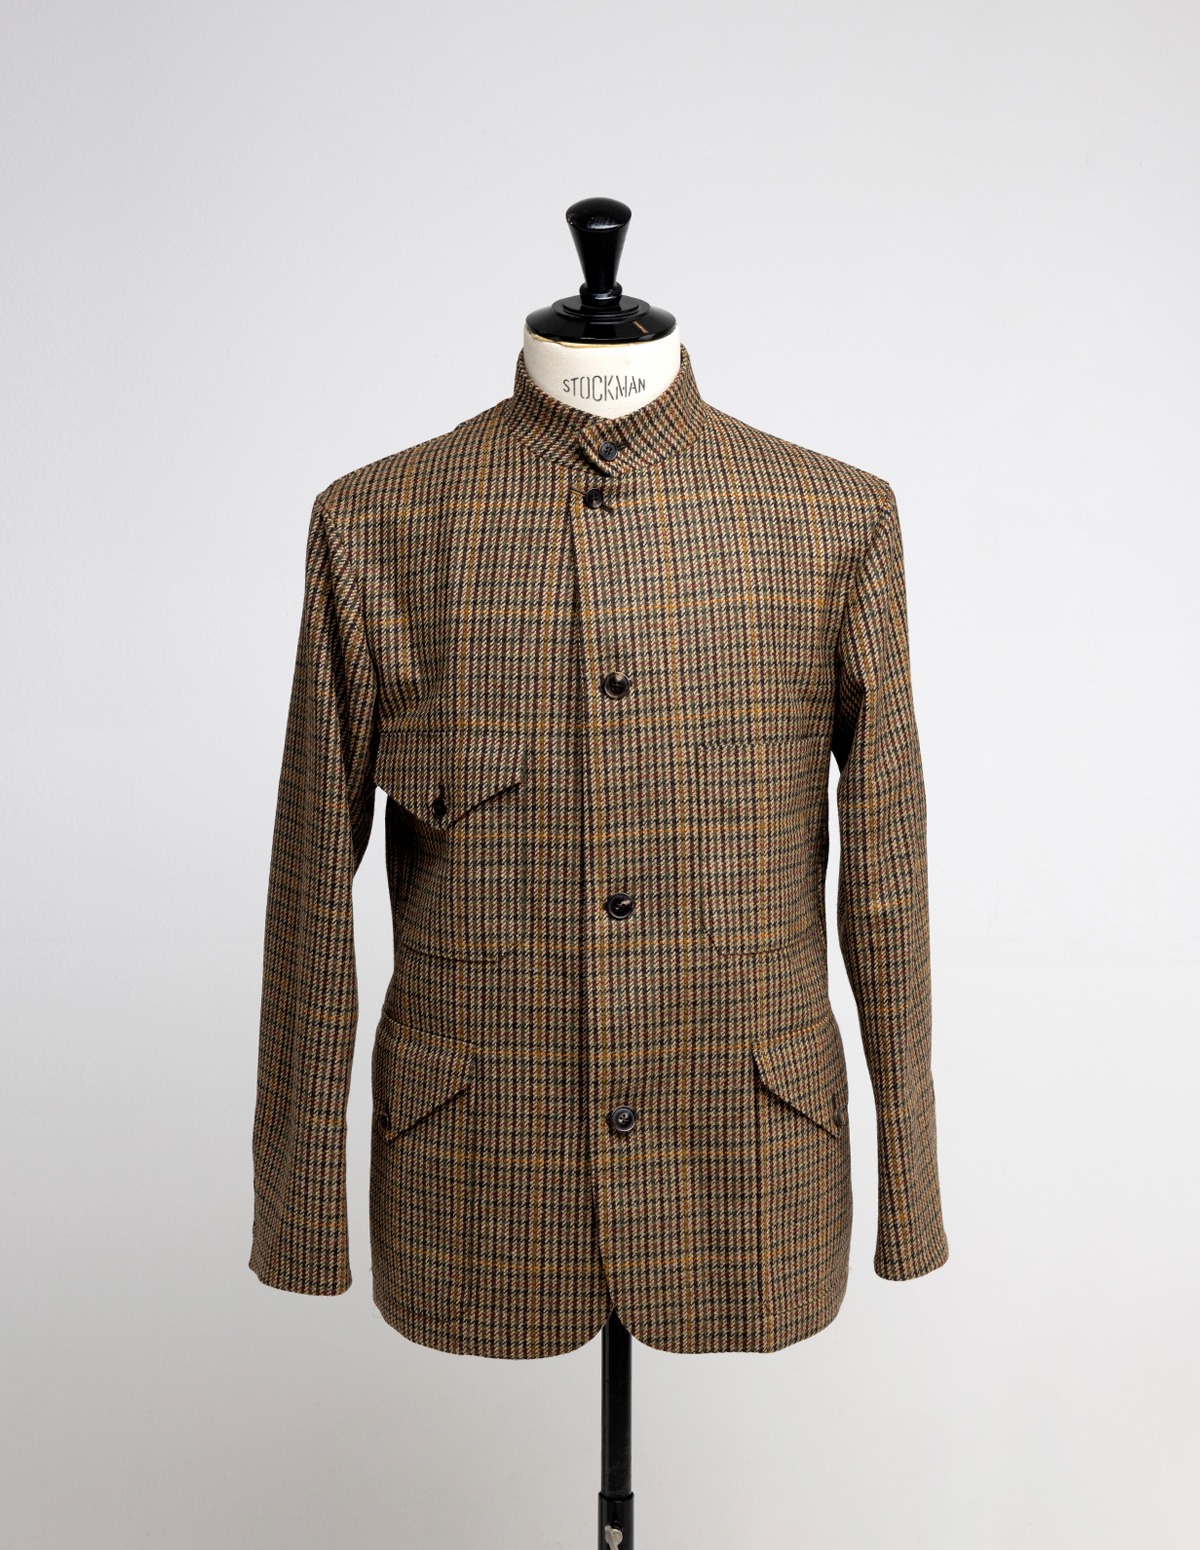 TROPICAL OFFICER Cheviot Tweed Jacket